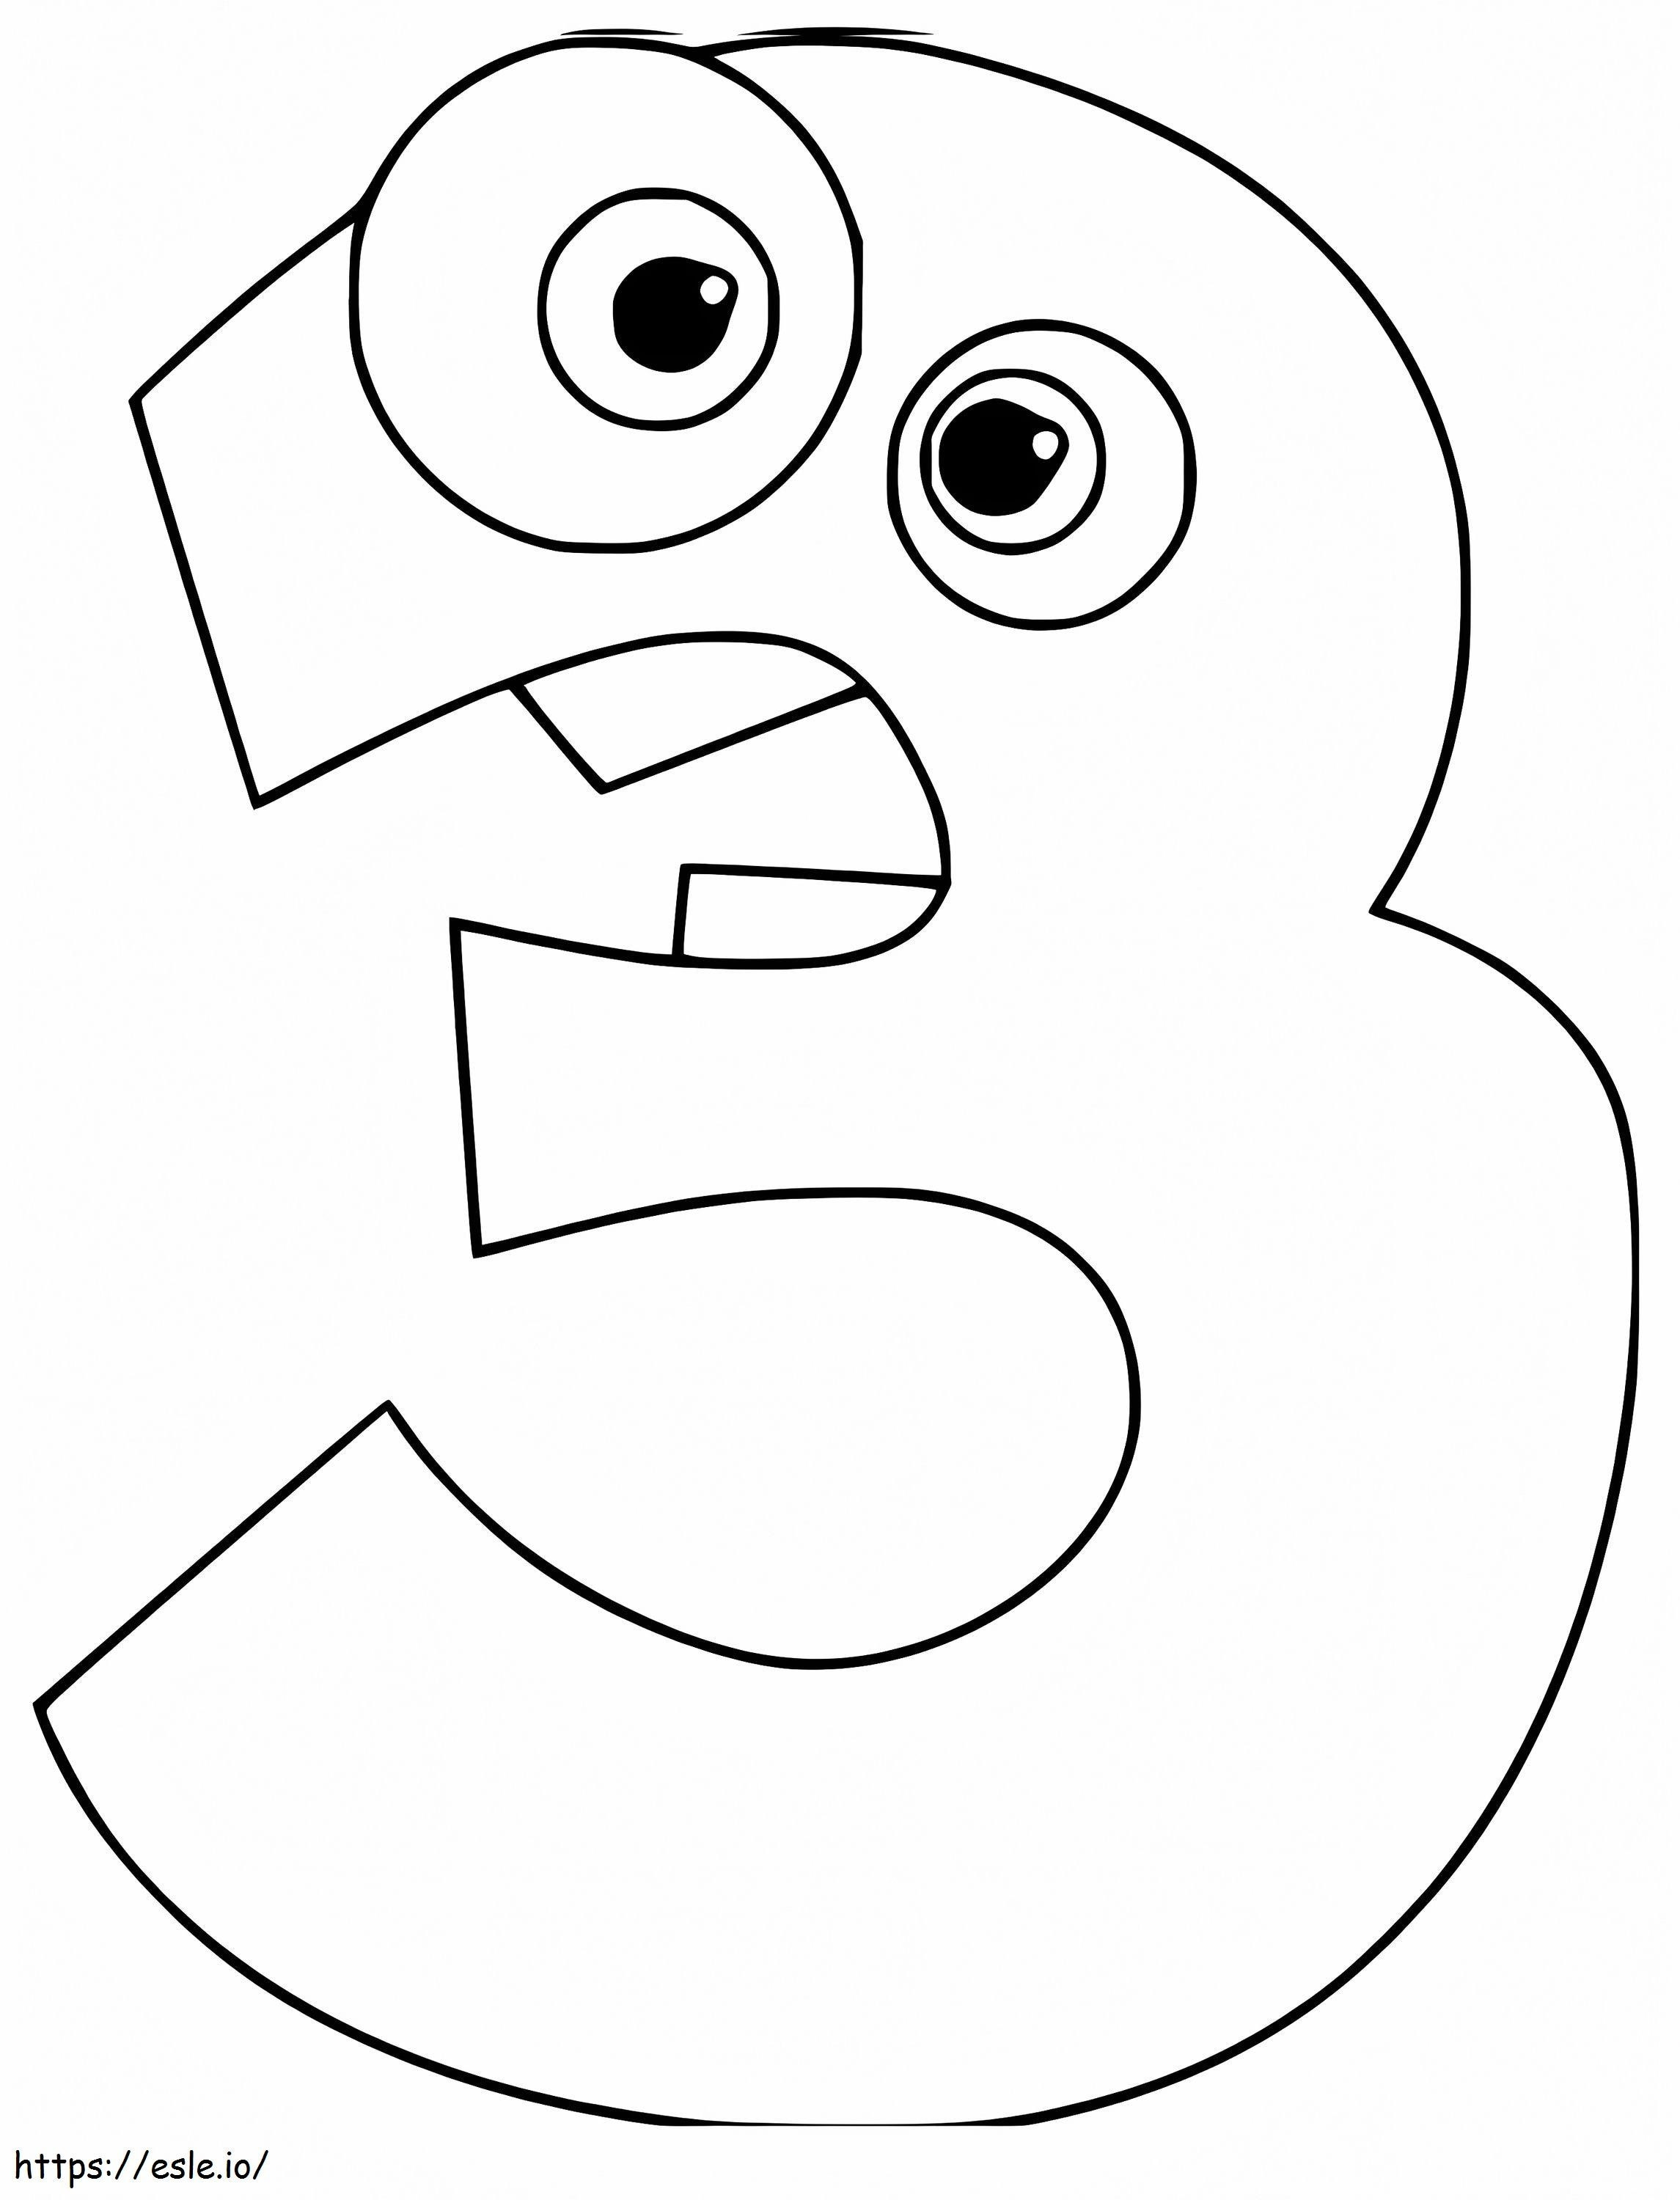 Funny Number 3 coloring page